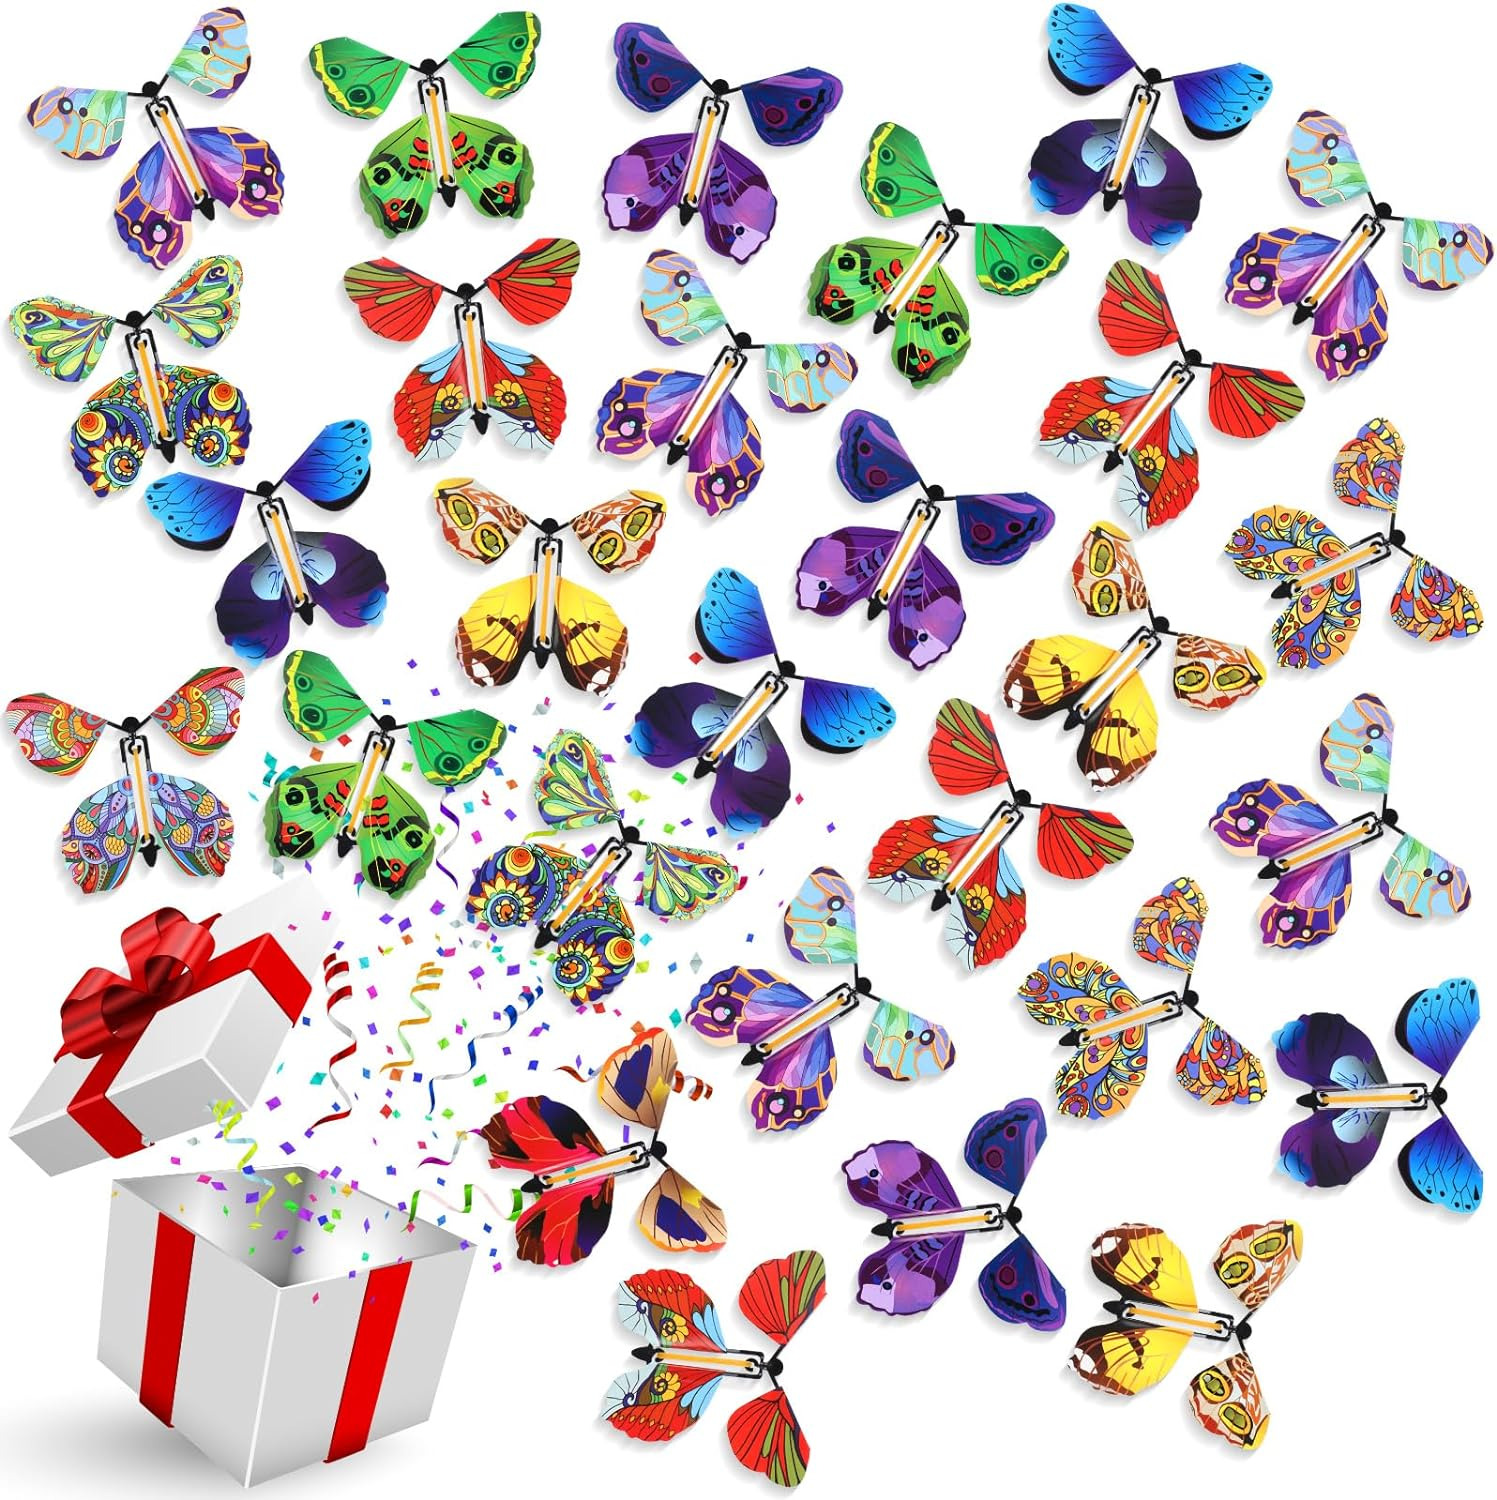 100 Pcs Magic Flying Butterfly Wind up Butterfly Paper Butterflies That Fly Rubb